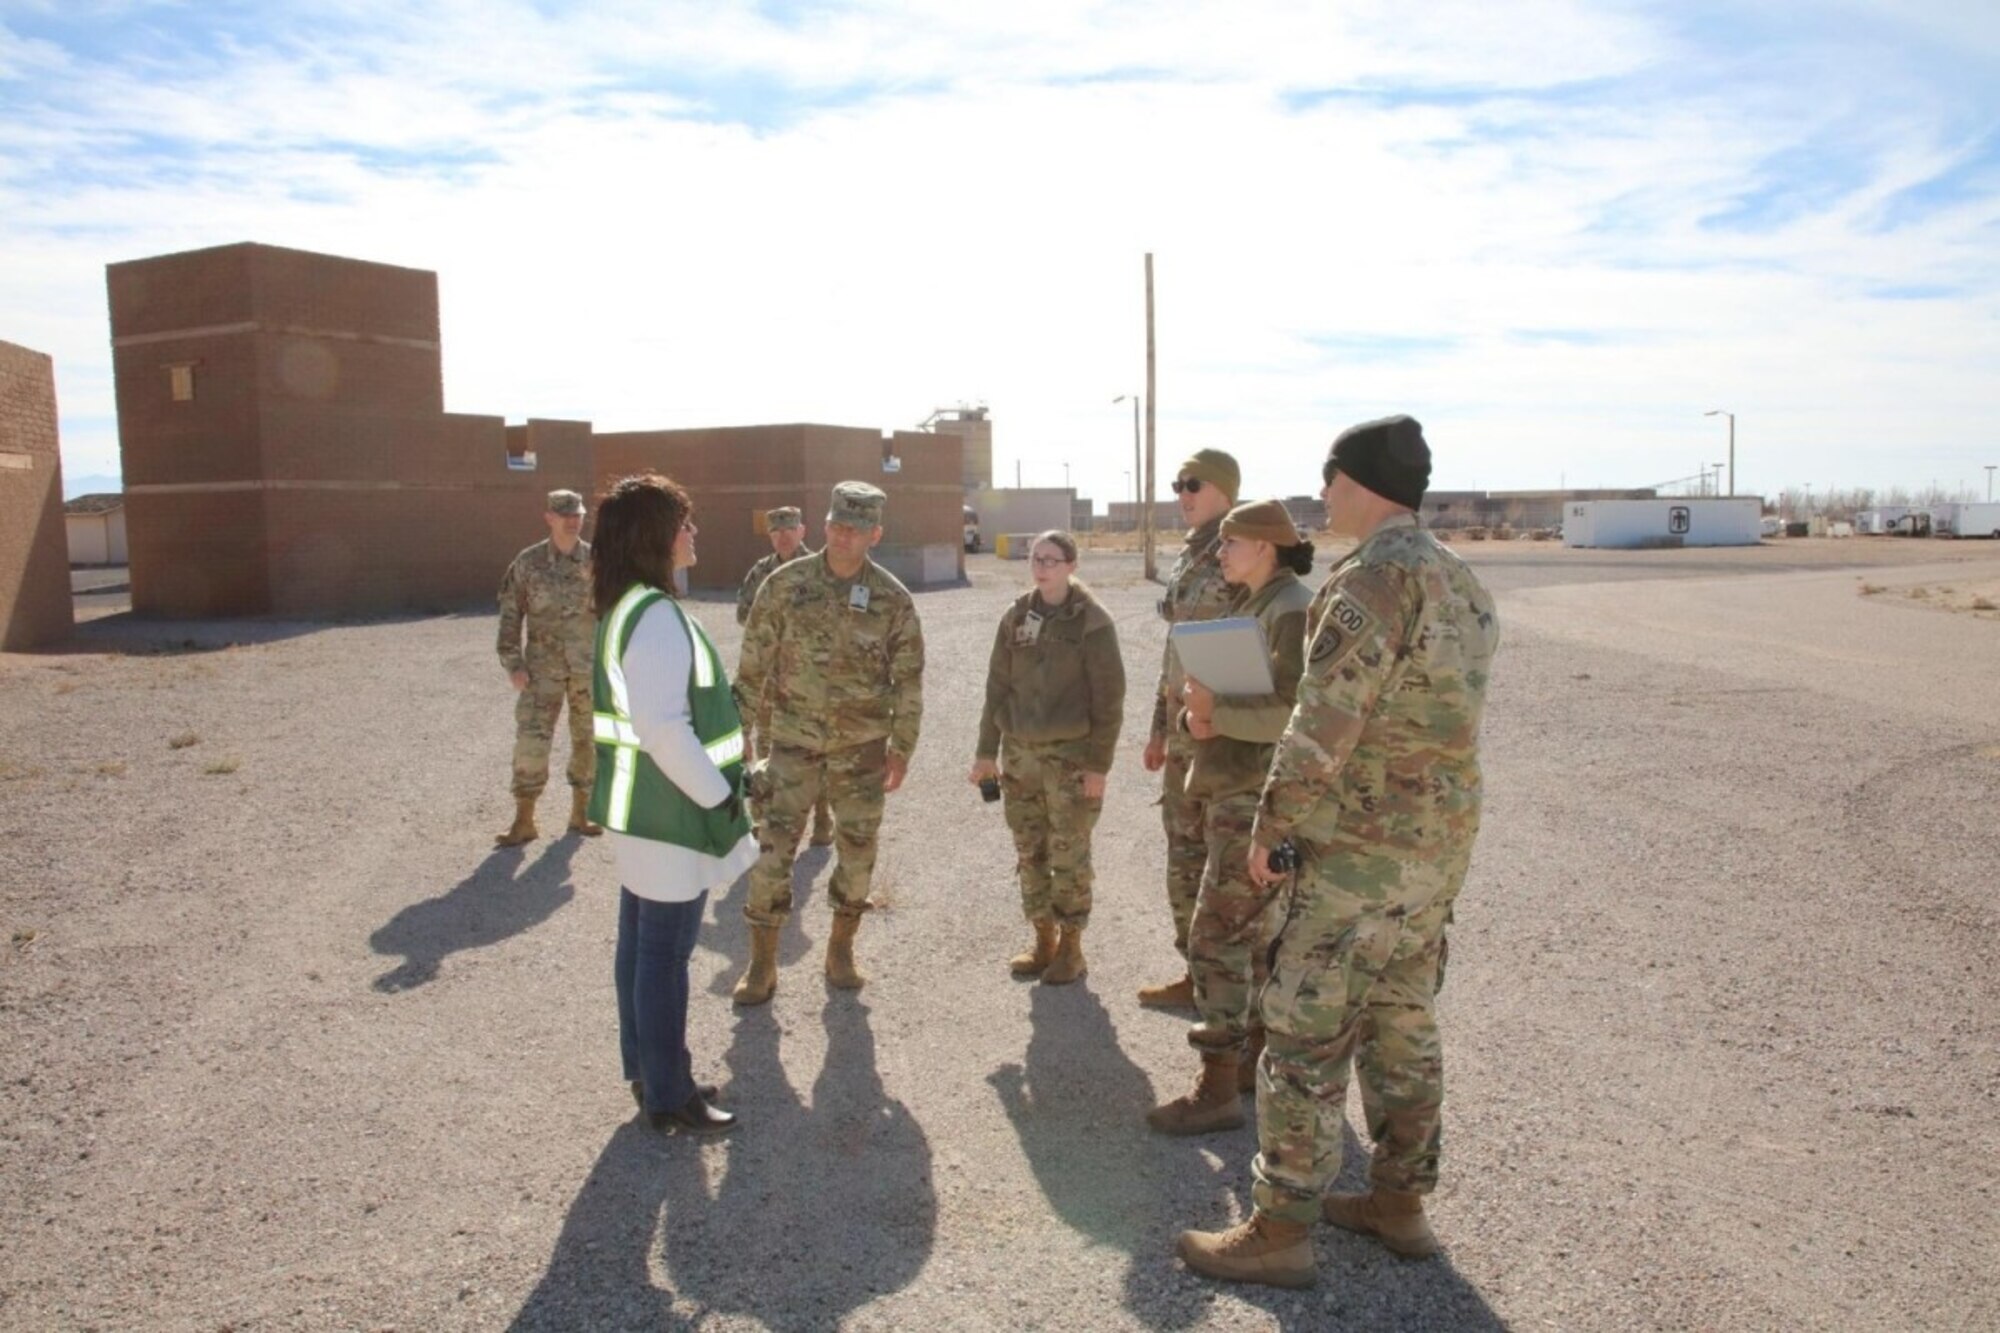 Units from the U.S. military’s premier all hazards command trained together during a radiological course at the Defense Nuclear Weapons School on Kirtland Air Force Base, New Mexico. Soldiers from the 20th Chemical, Biological, Radiological, Nuclear, Explosives (CBRNE) Command’s 1st Area Medical Laboratory and Nuclear Disablement Teams both participated in the Applied Radiological Response Techniques Level 2 course. Courtesy photo.